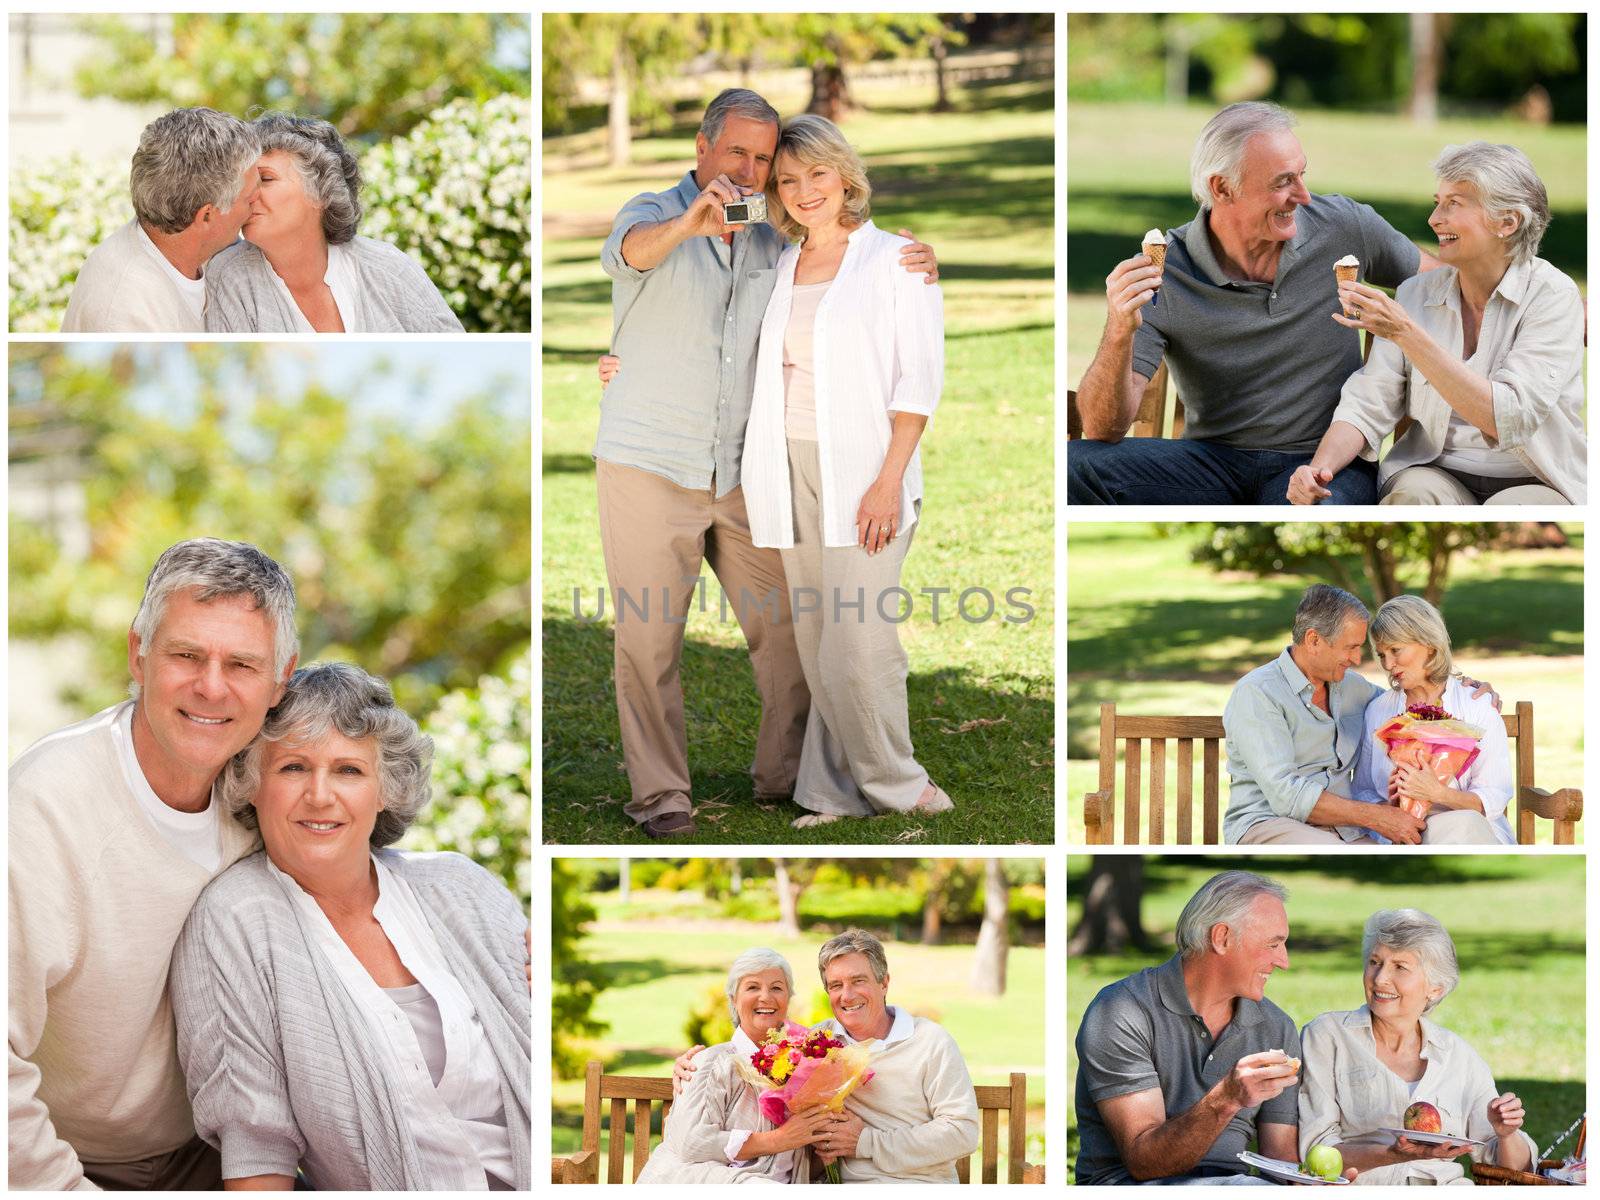 Collage of a mature couple in a park